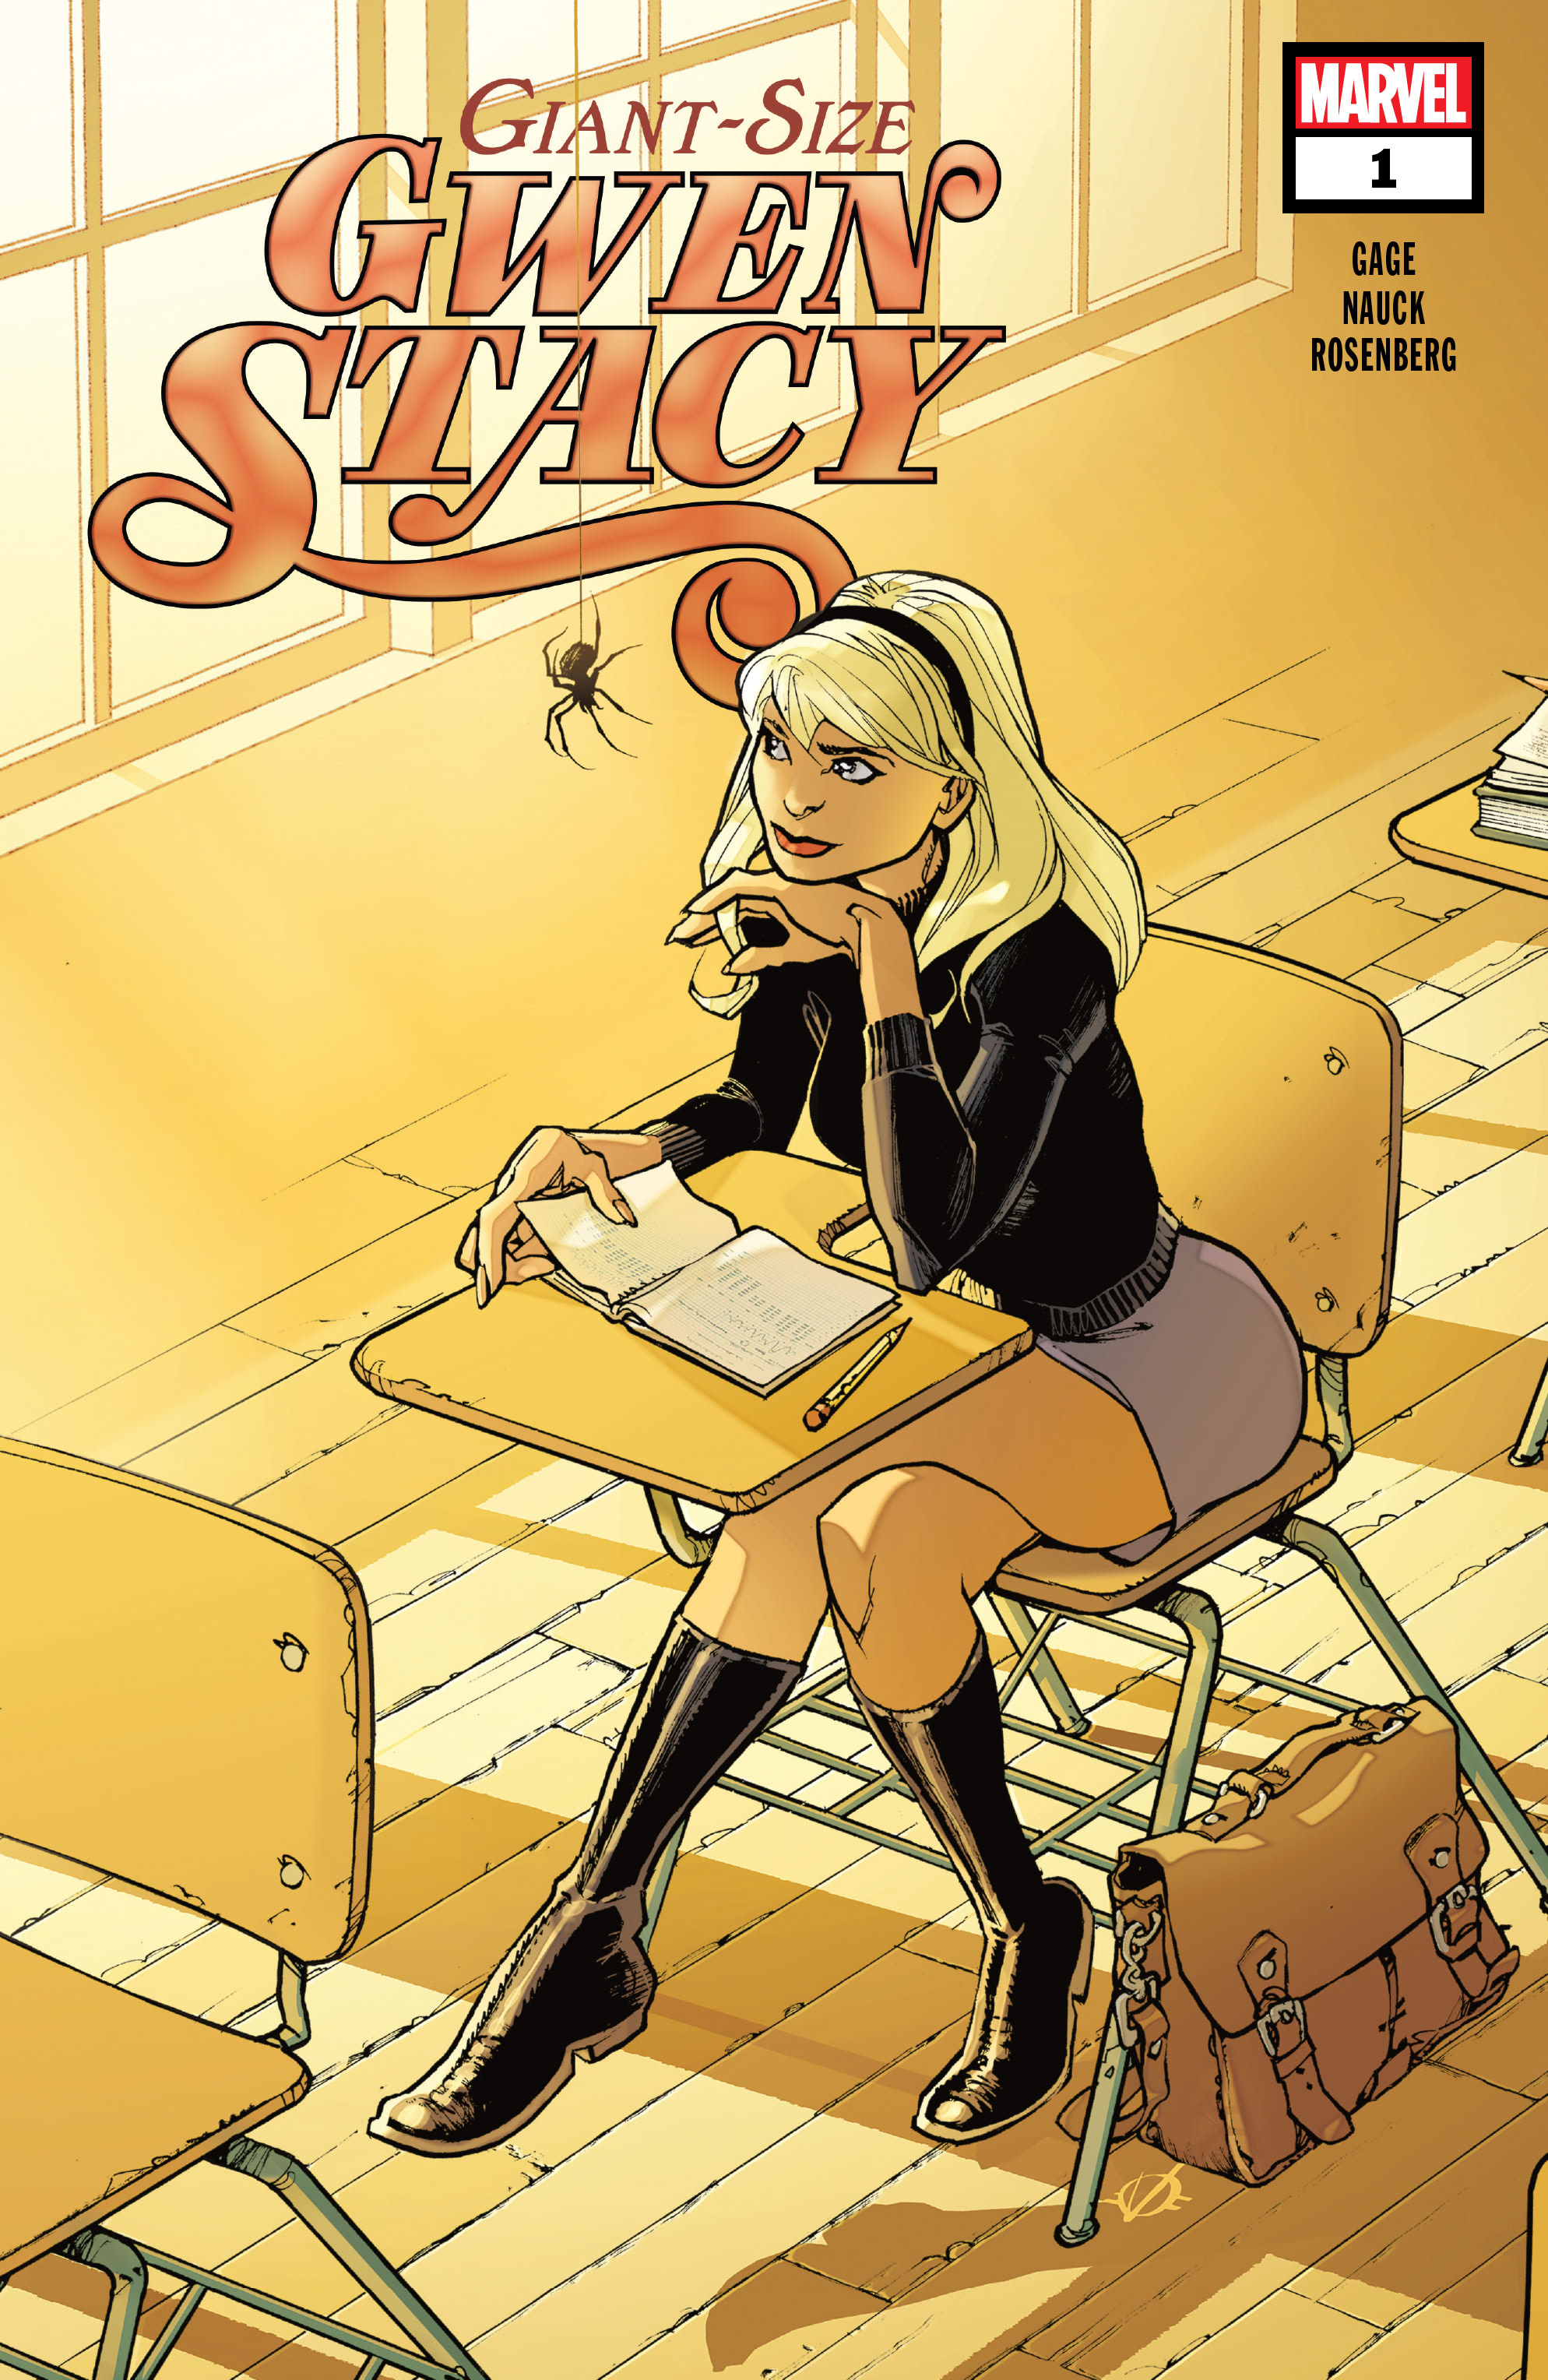 Read online Giant-Size Gwen Stacy comic -  Issue #1 - 1